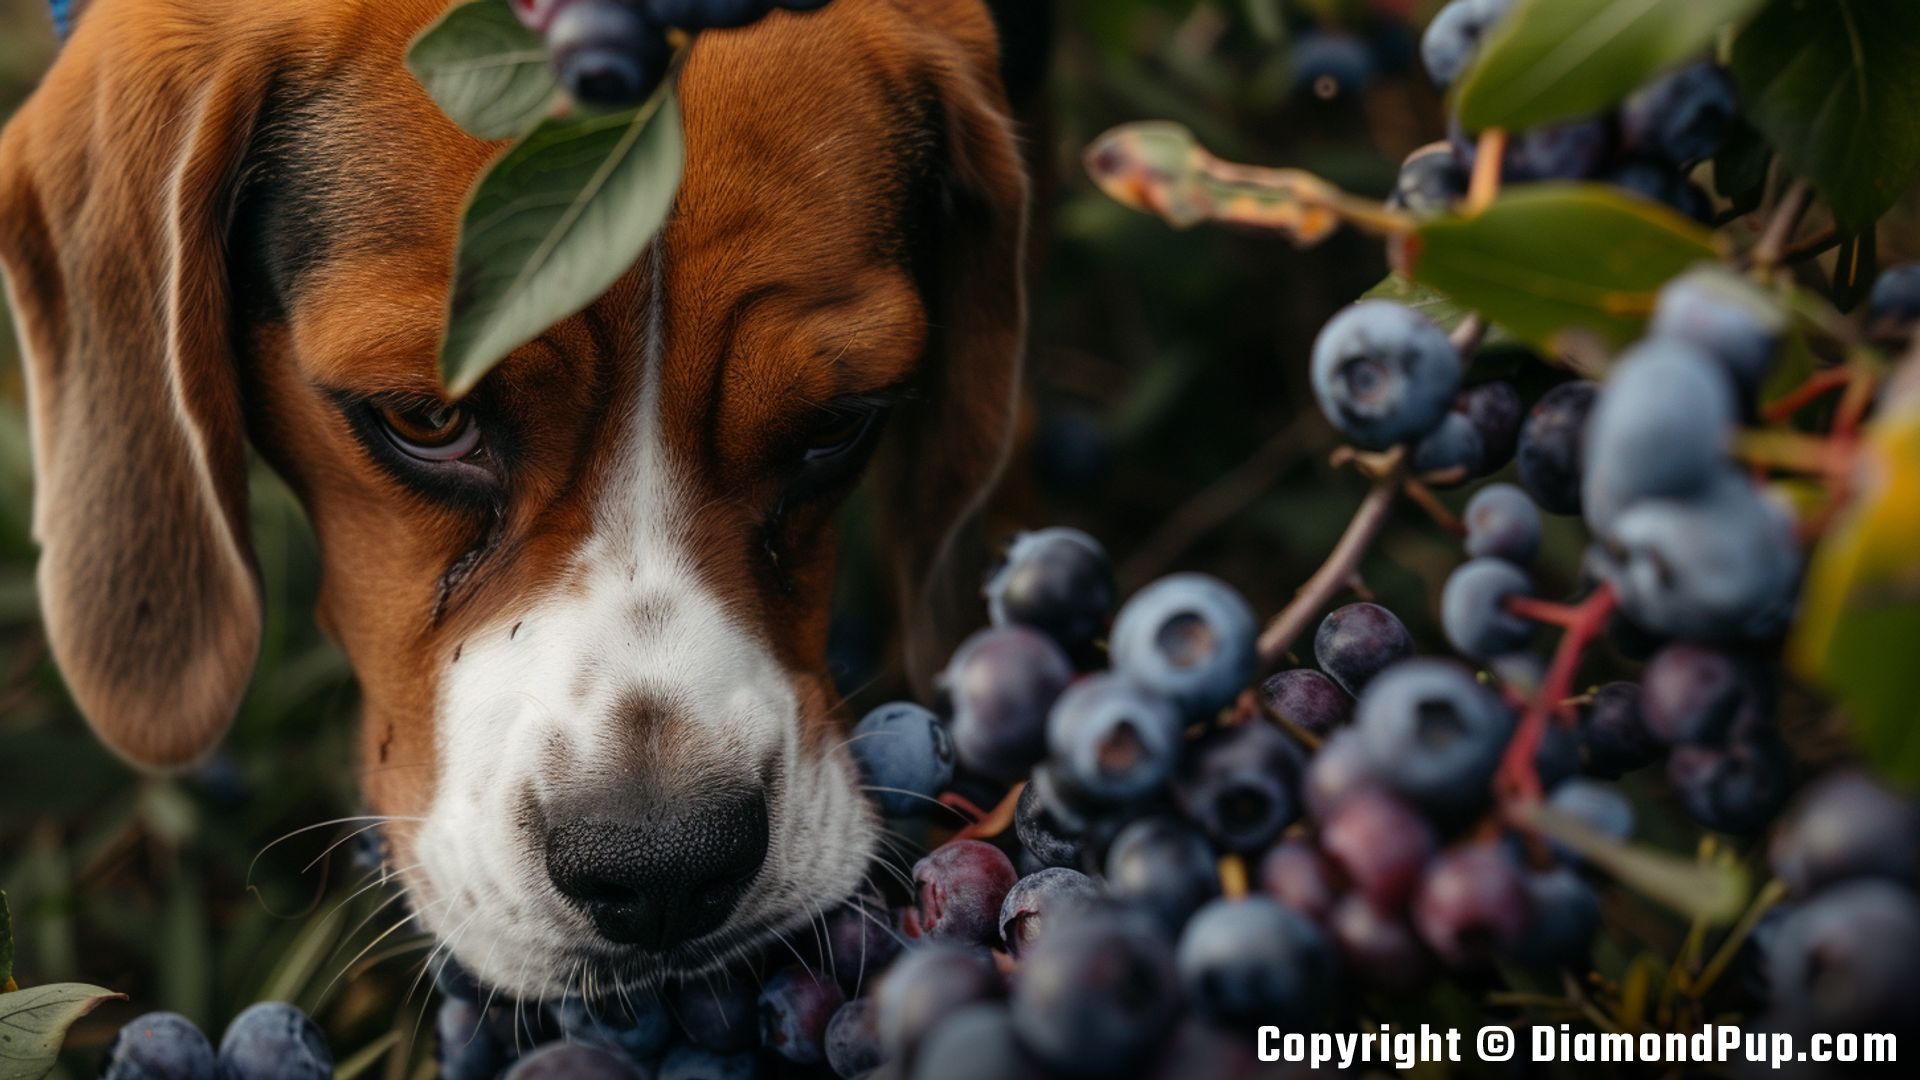 Photograph of a Happy Beagle Snacking on Blueberries